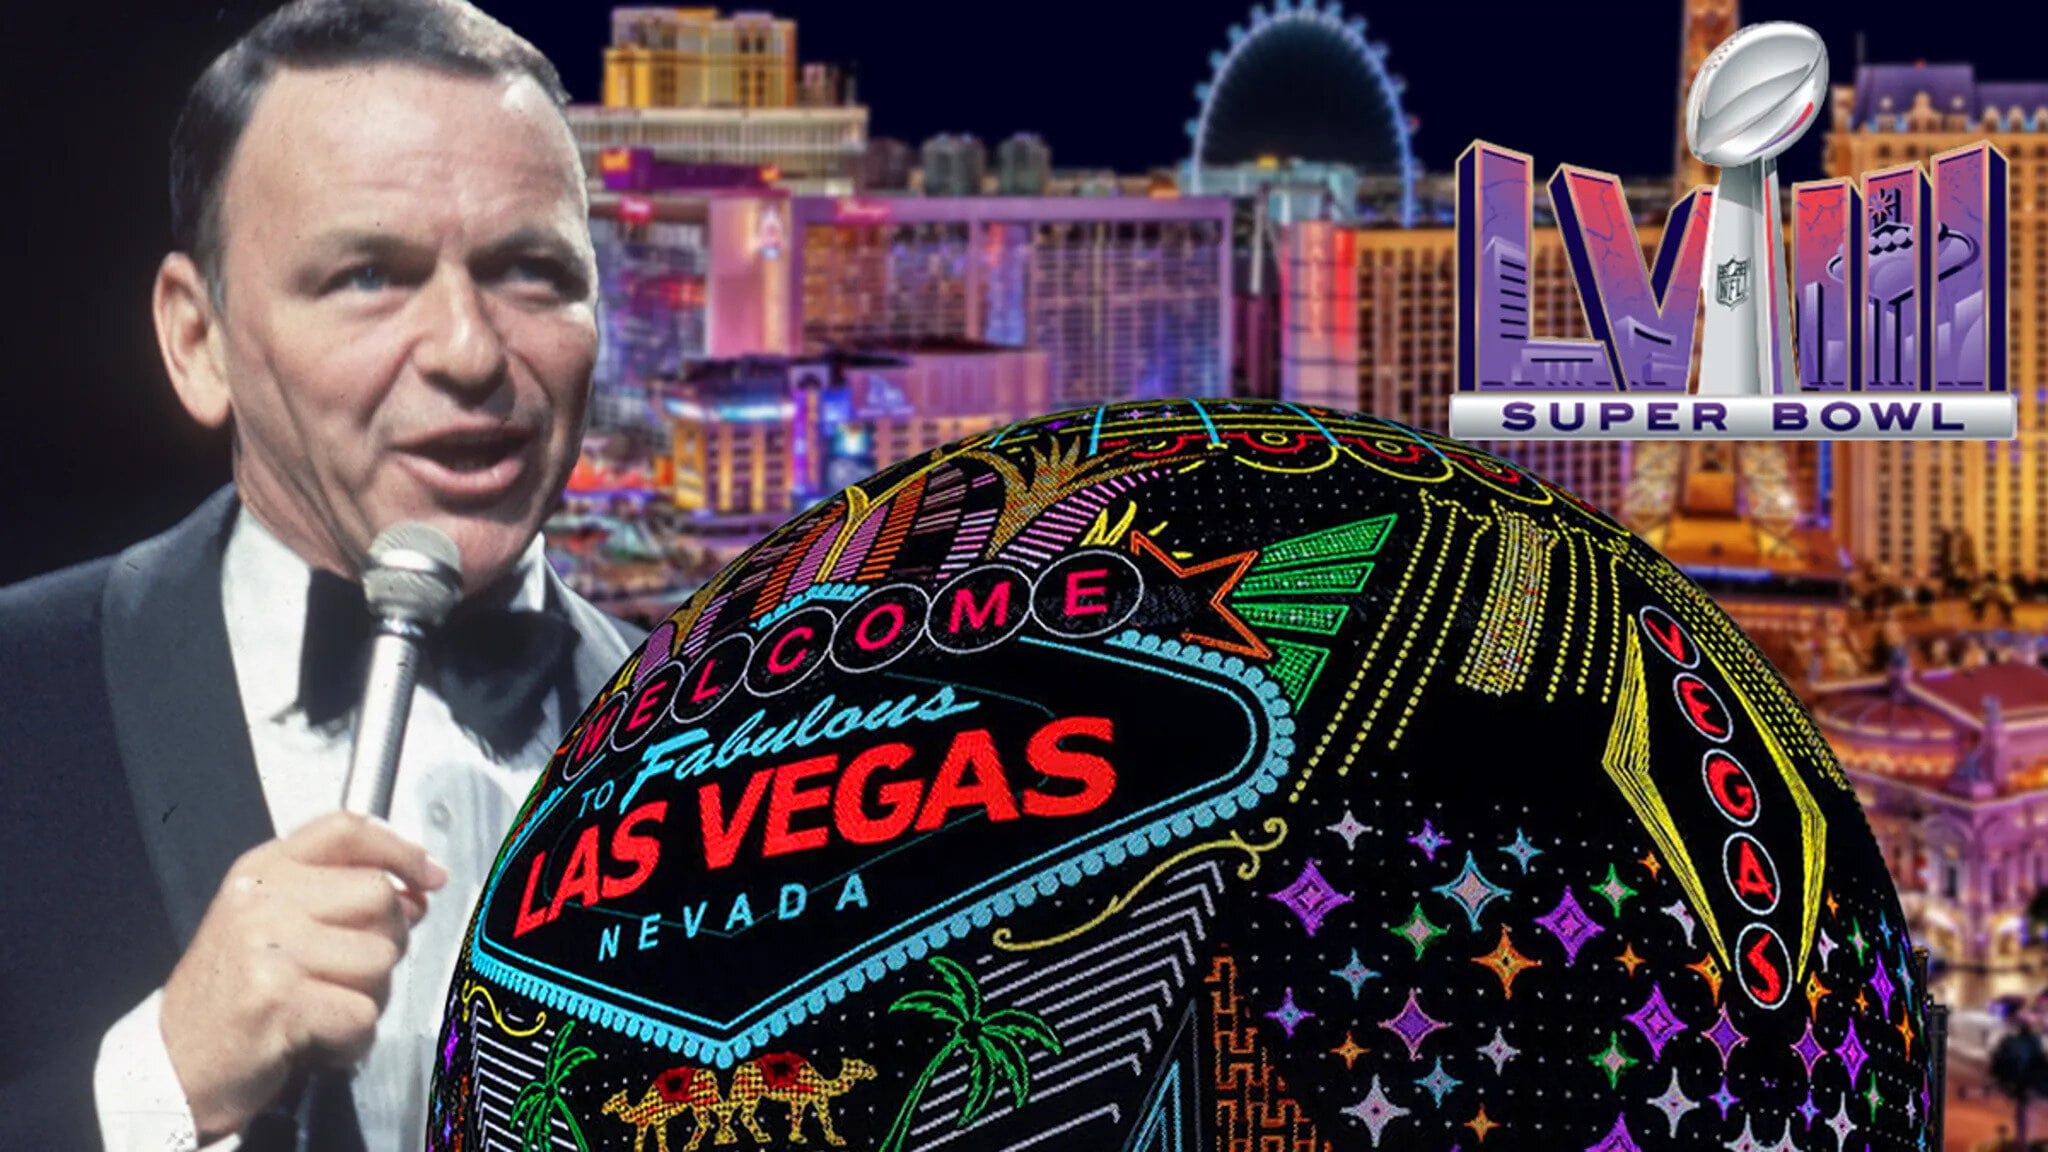 Super Bowl LVIII To Honor Las Vegas With Sinatra’s ‘My Way’ Broadcast